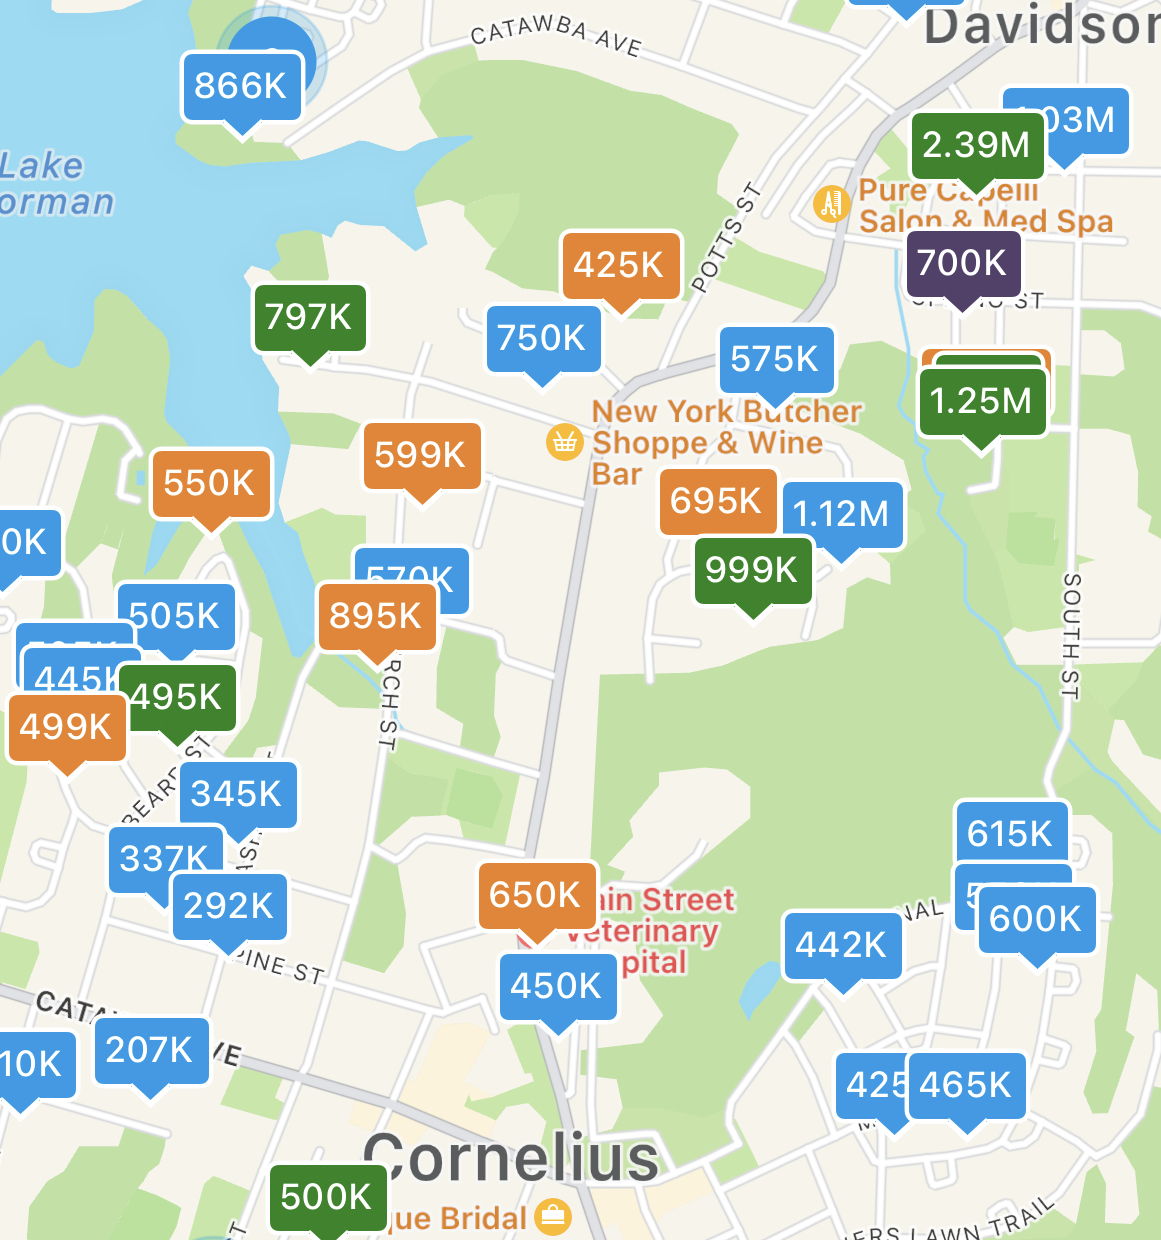 Blue = SOLD, Orange = Under Contract, Green = Available